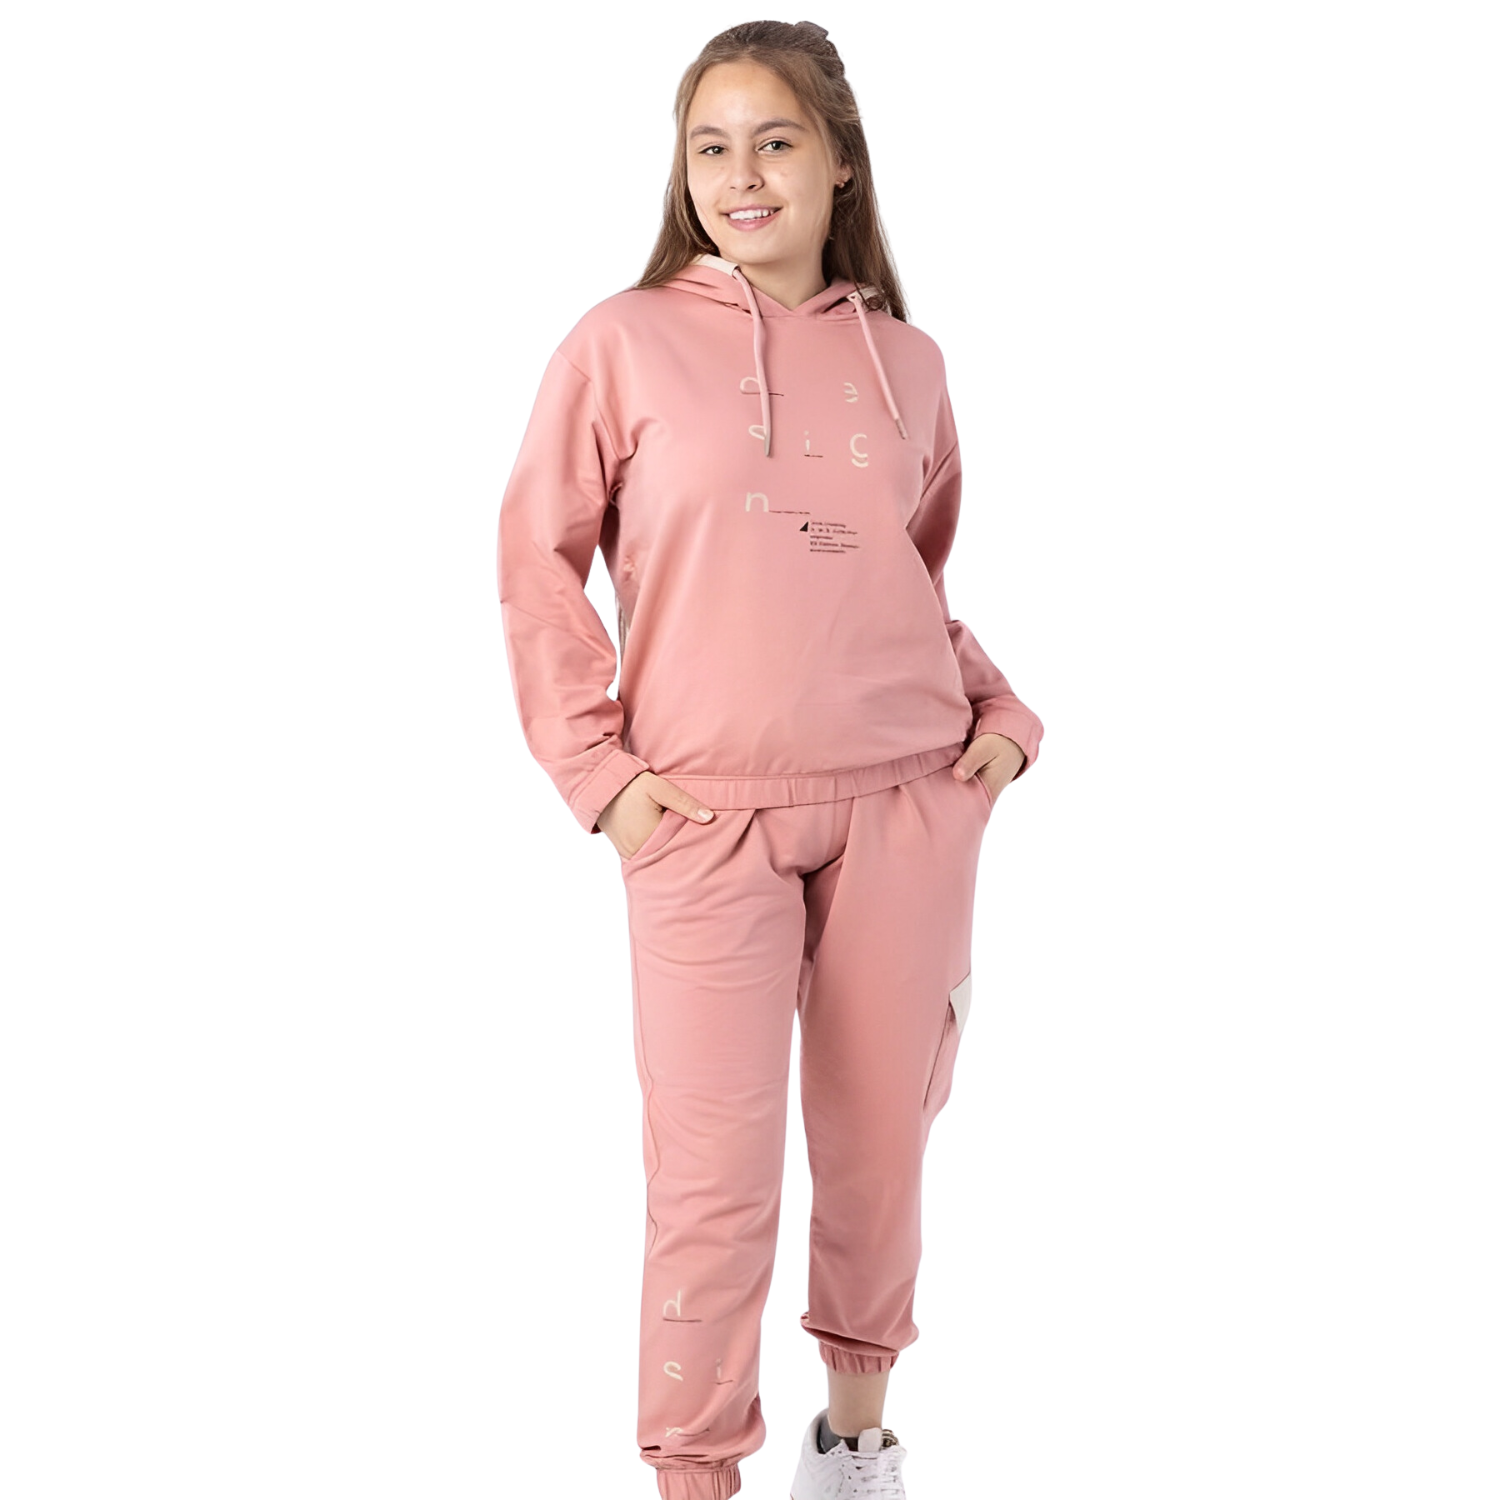 The Soft Jogger Girls Casual Set